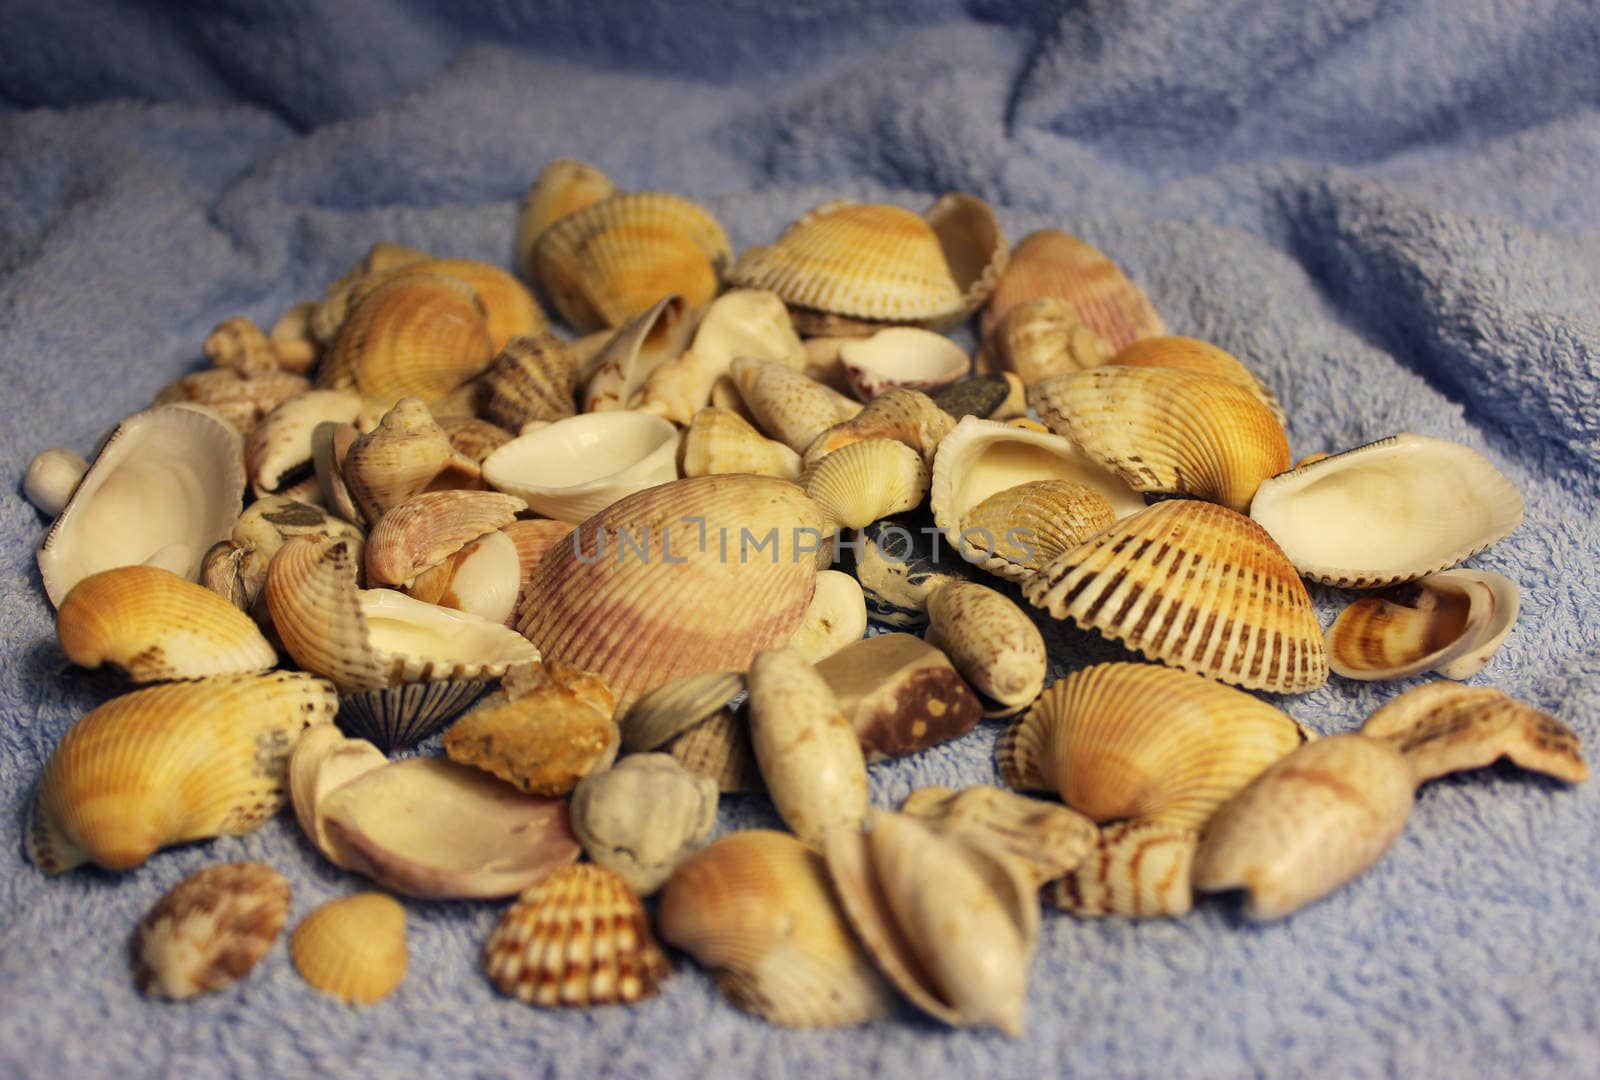 Stones and shells from the Arabian Sea